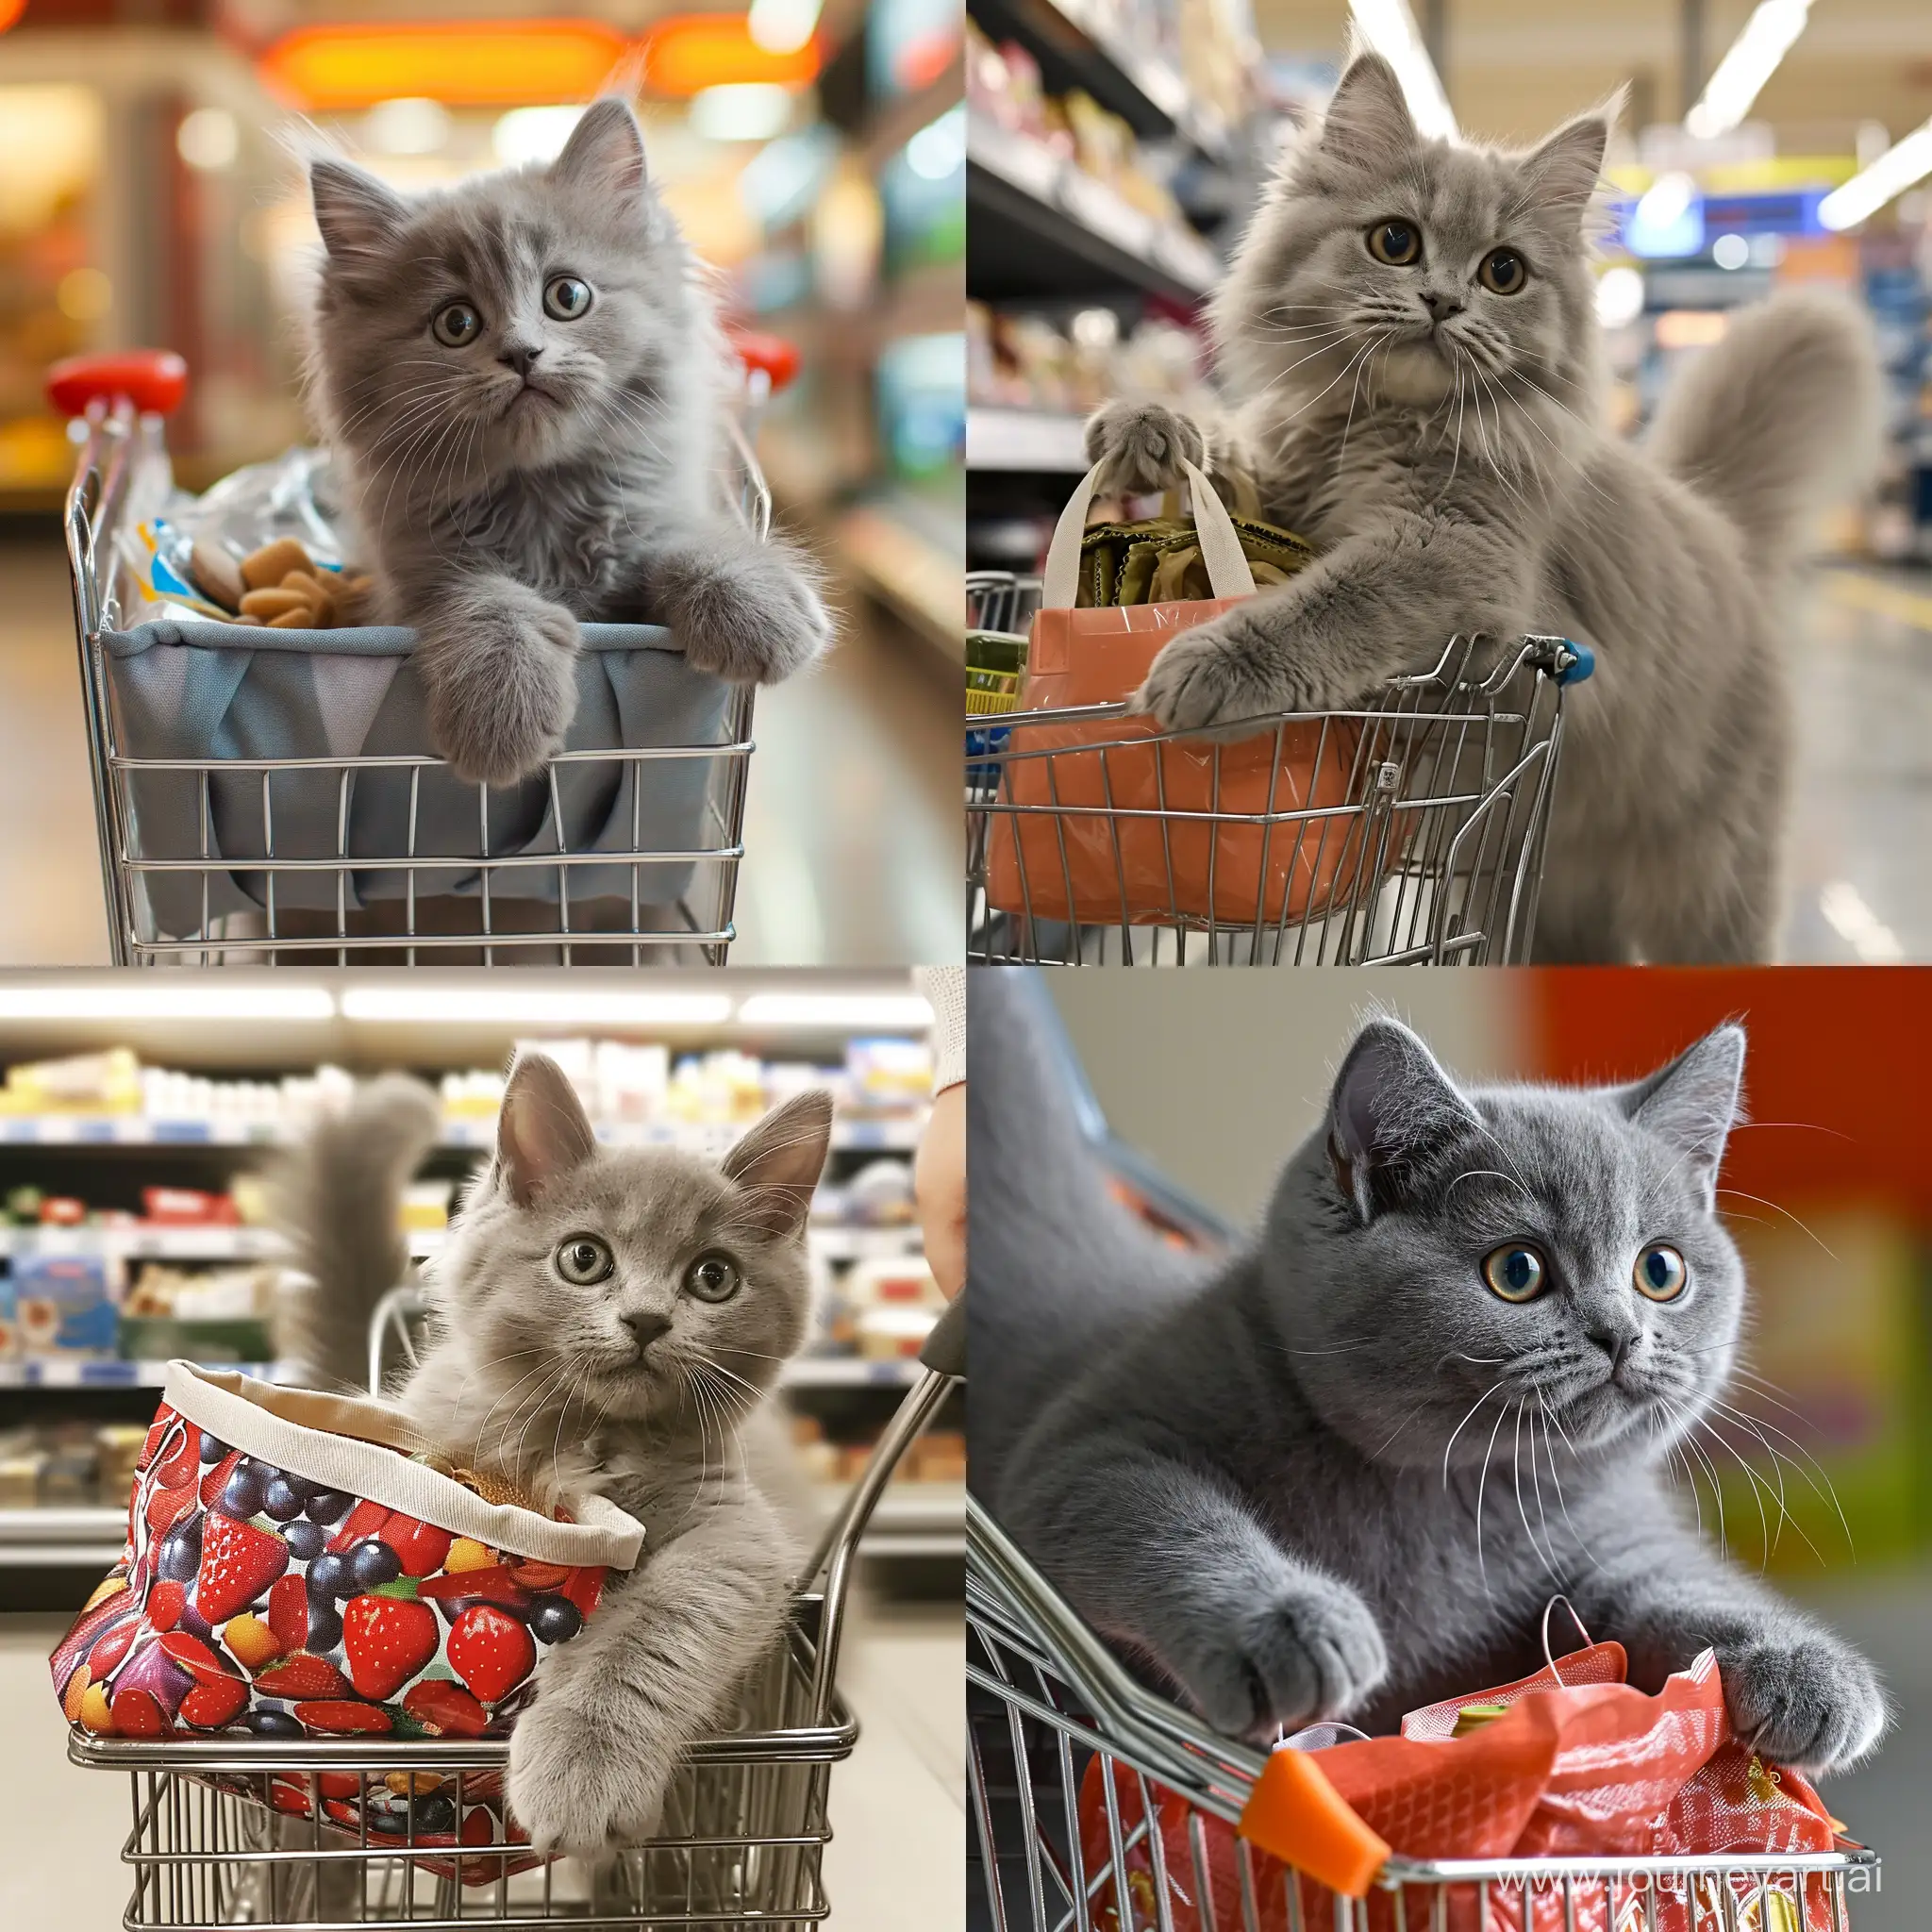 Cute-Gray-Cat-Shopping-with-a-Purple-Bag-in-a-Supermarket